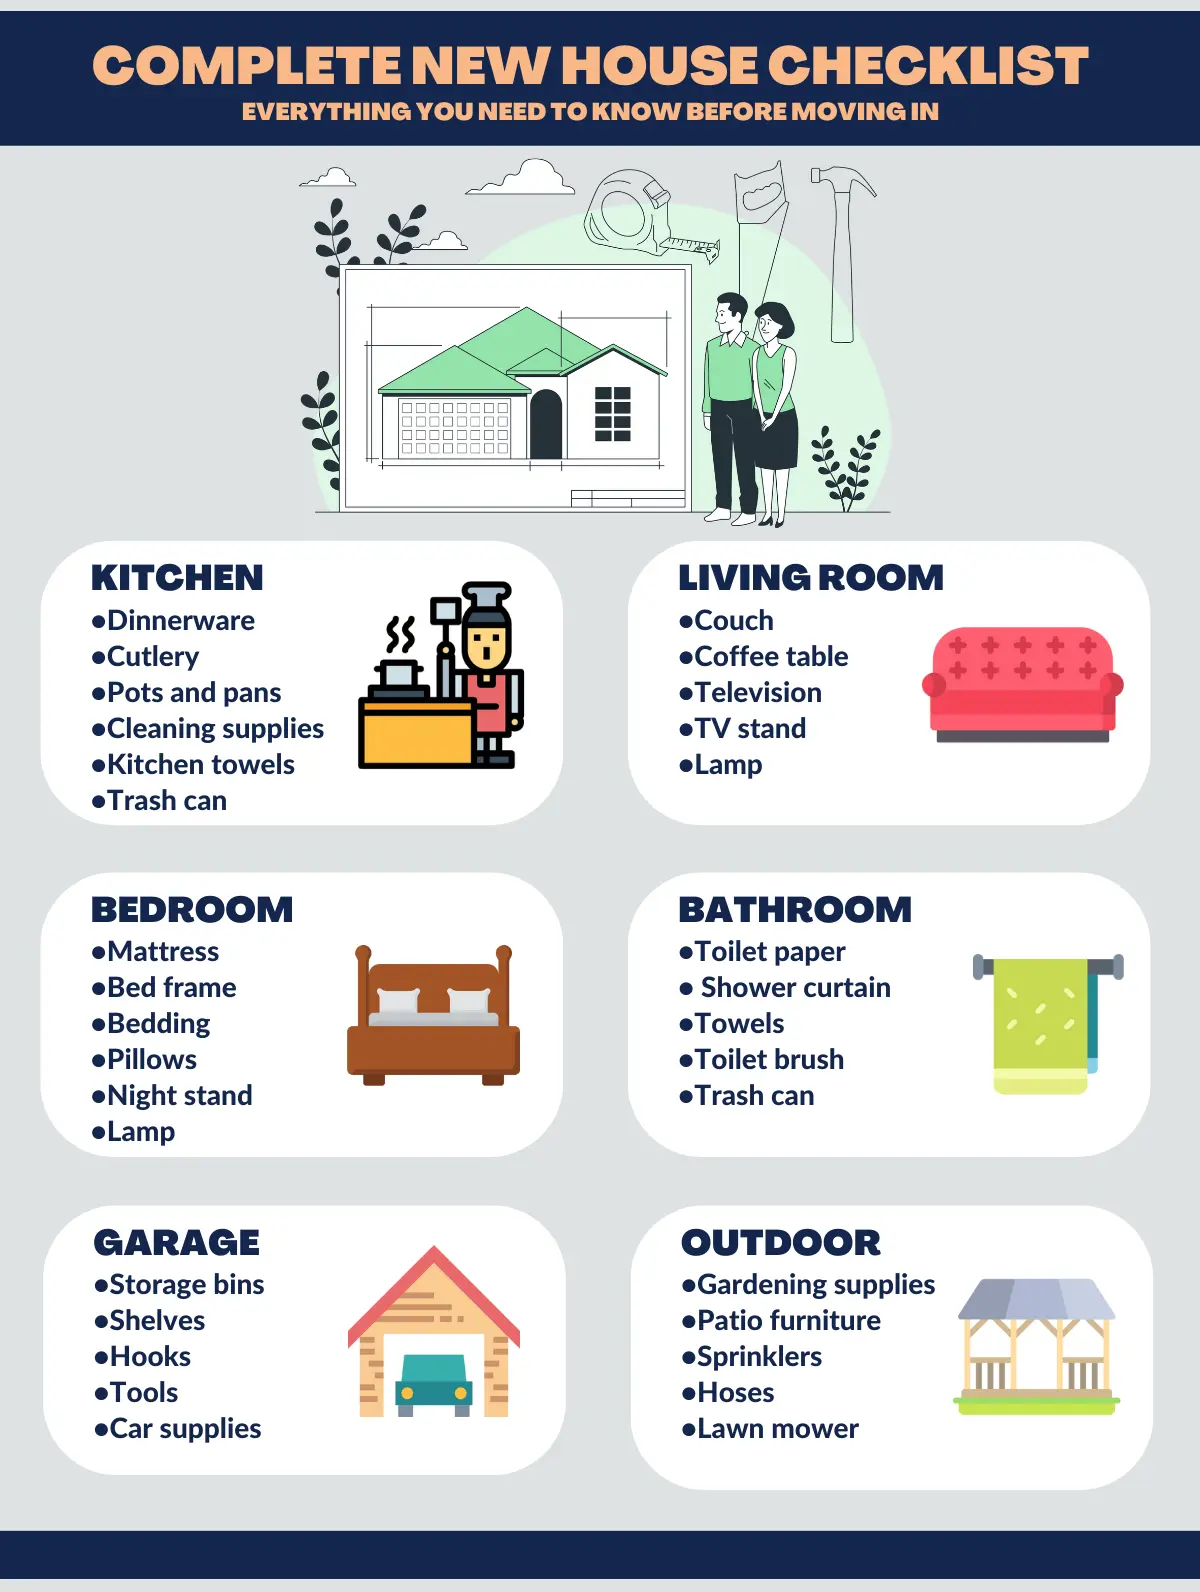 Complete New House Checklist Informational Infographic